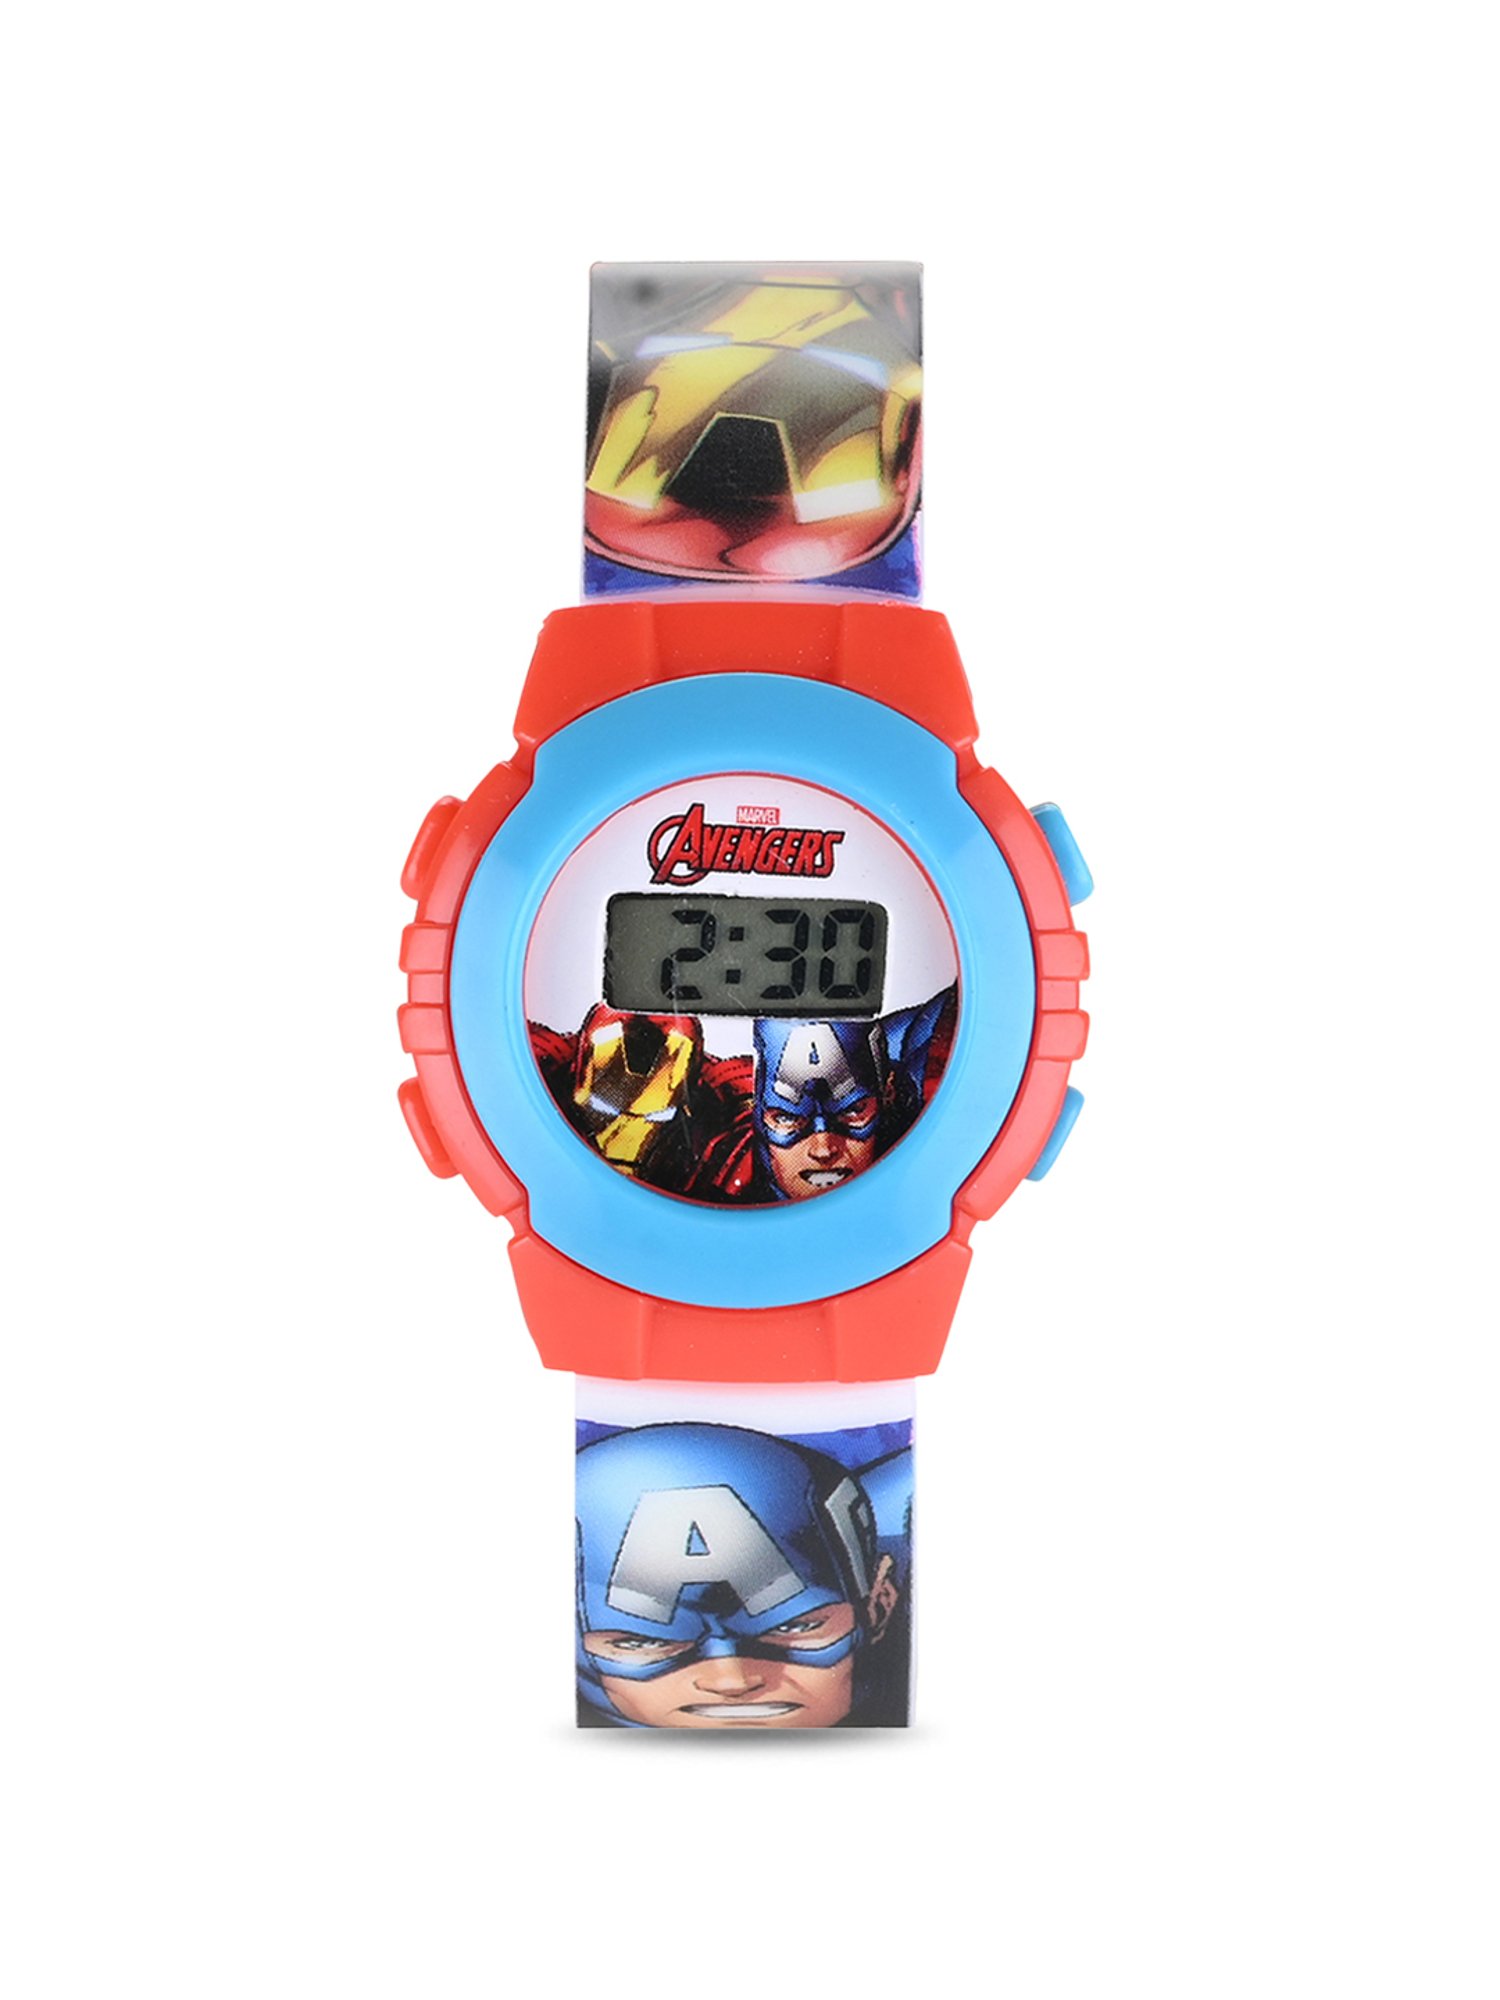 Renaissance Traders - Black Dial Digital Boys Watch ( Pack of 1 ) - Buy  Renaissance Traders - Black Dial Digital Boys Watch ( Pack of 1 ) Online at  Best Prices in India on Snapdeal